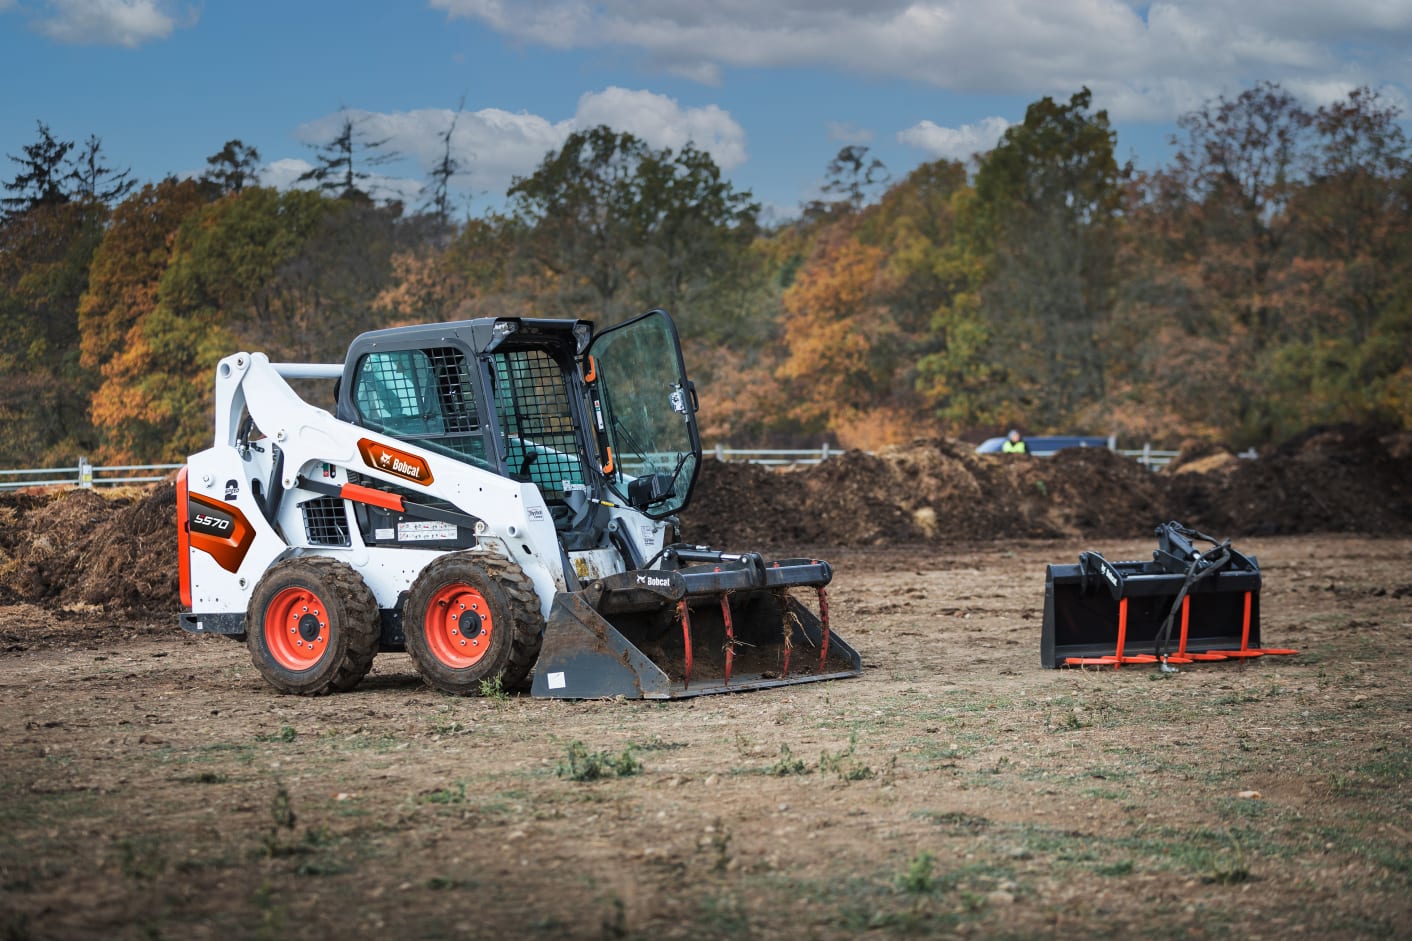 Browse Specs and more for the S570 Skid-Steer Loader - Bobcat of North Texas